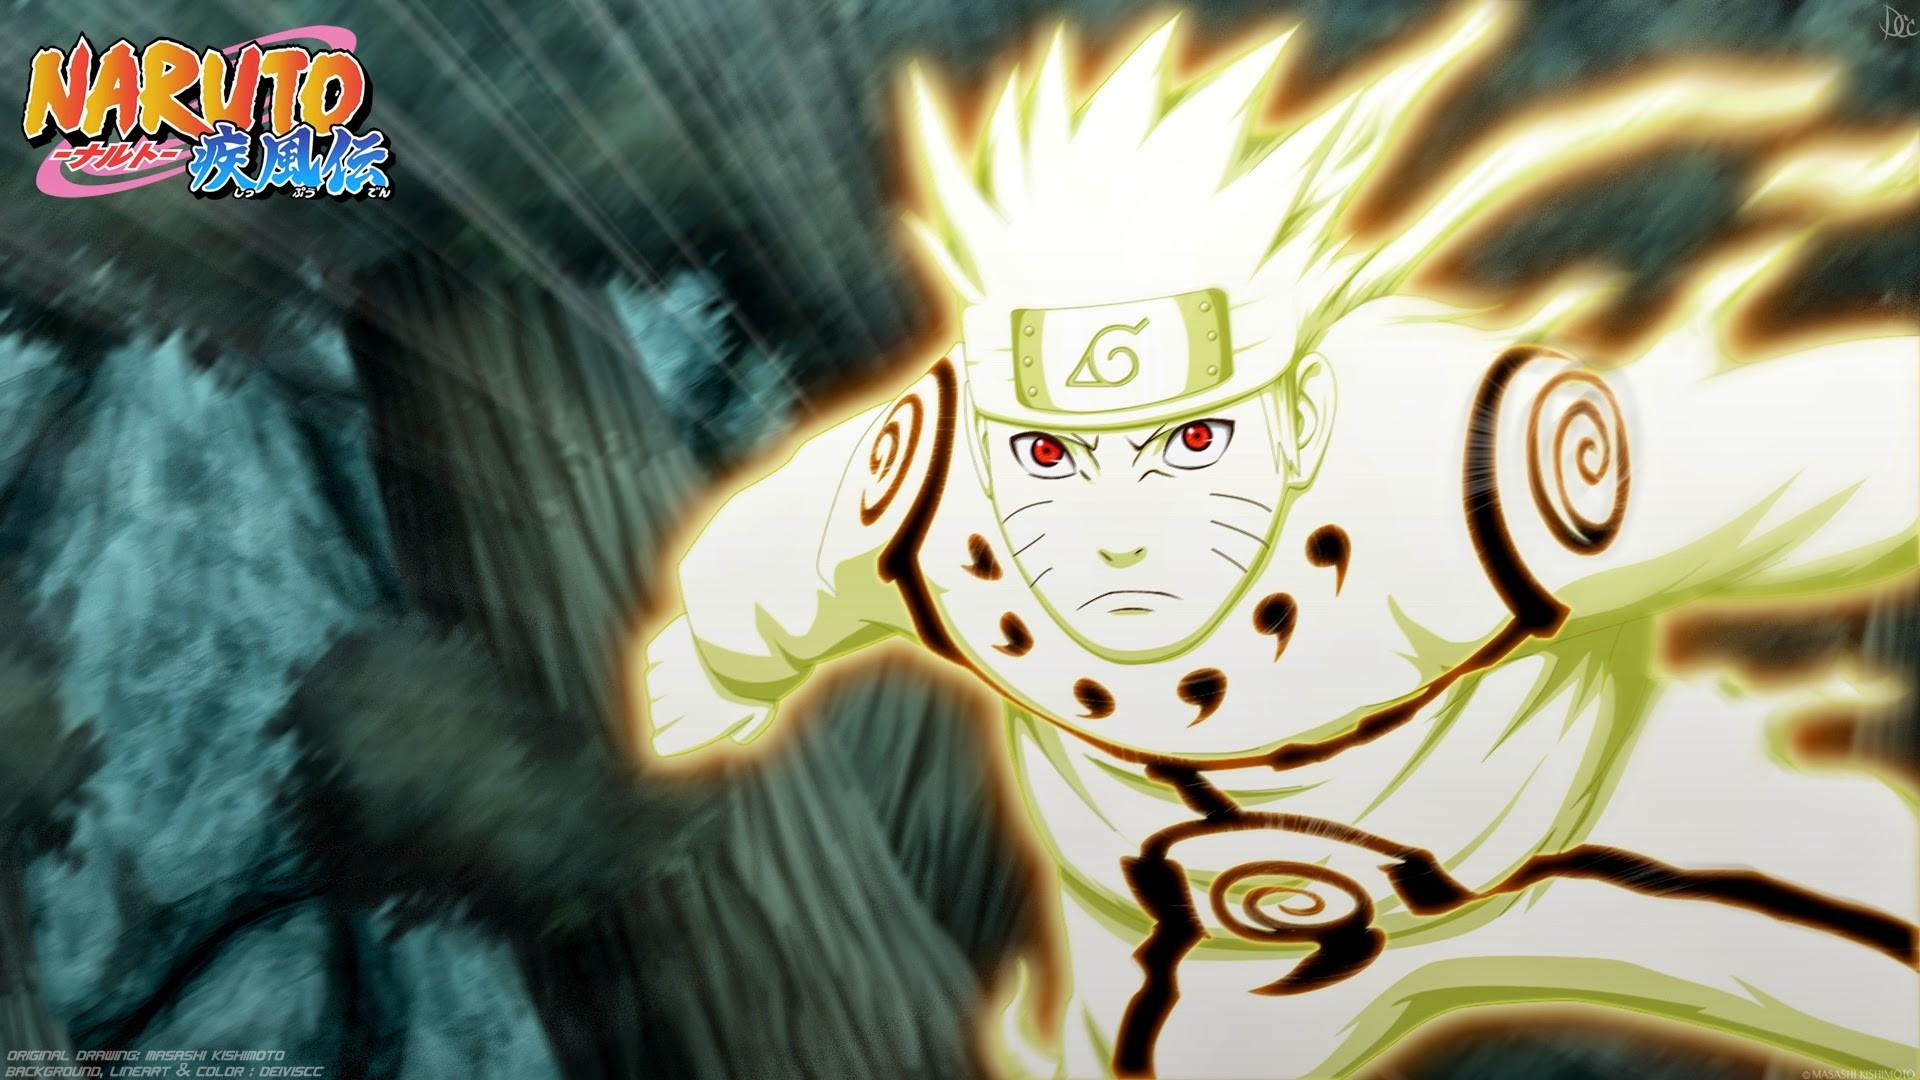 1920 x 1080 · jpeg - Naruto Live Wallpaper for PC (55+ images)